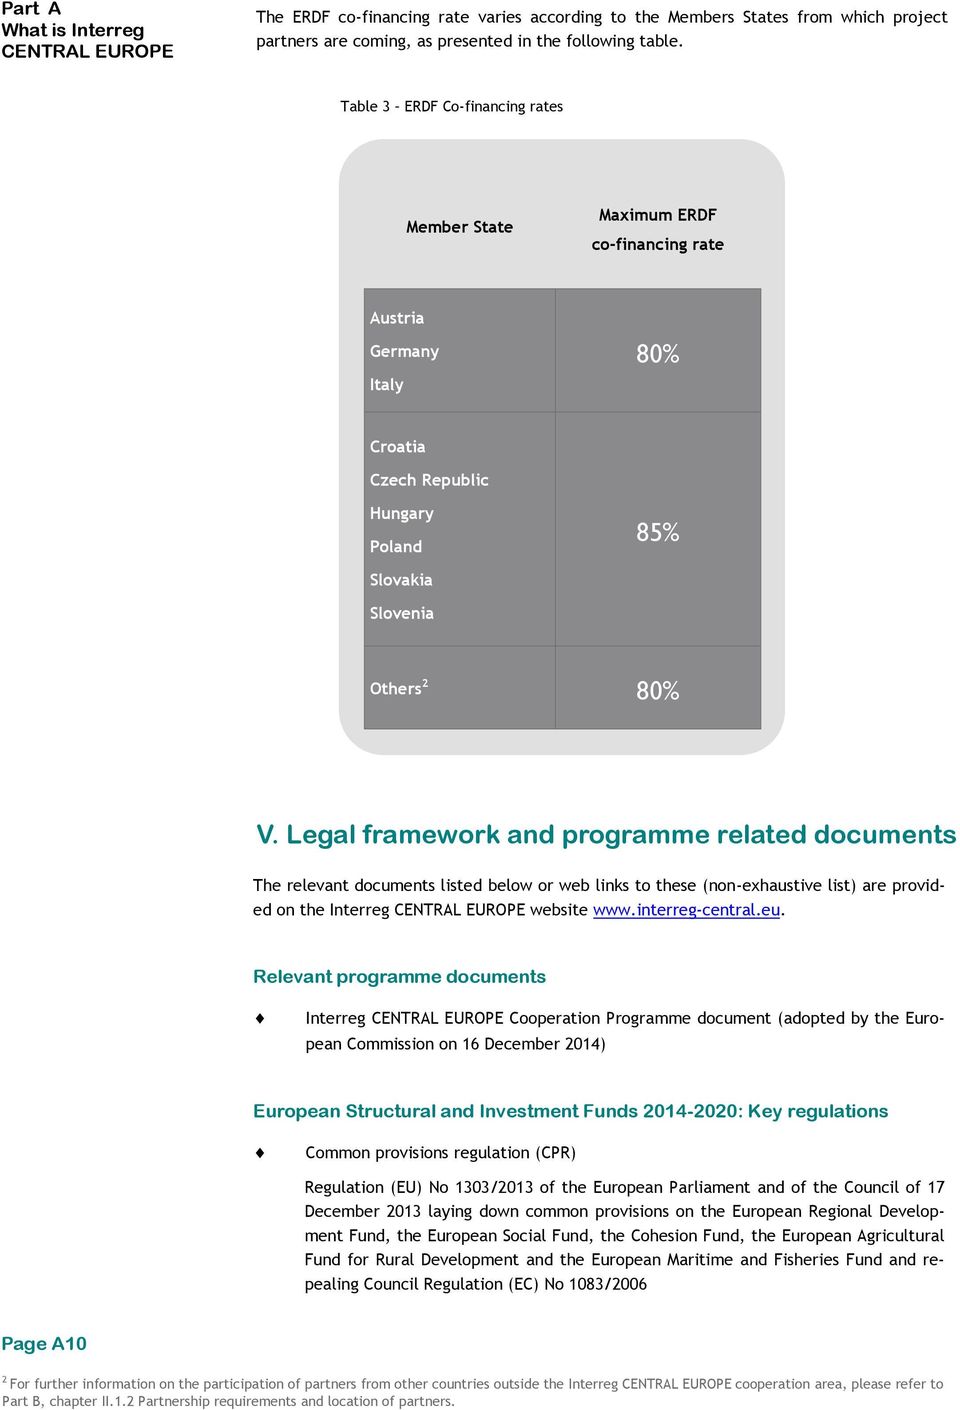 Legal framework and programme related documents The relevant documents listed below or web links to these (non-exhaustive list) are provided on the Interreg CENTRAL EUROPE website www.